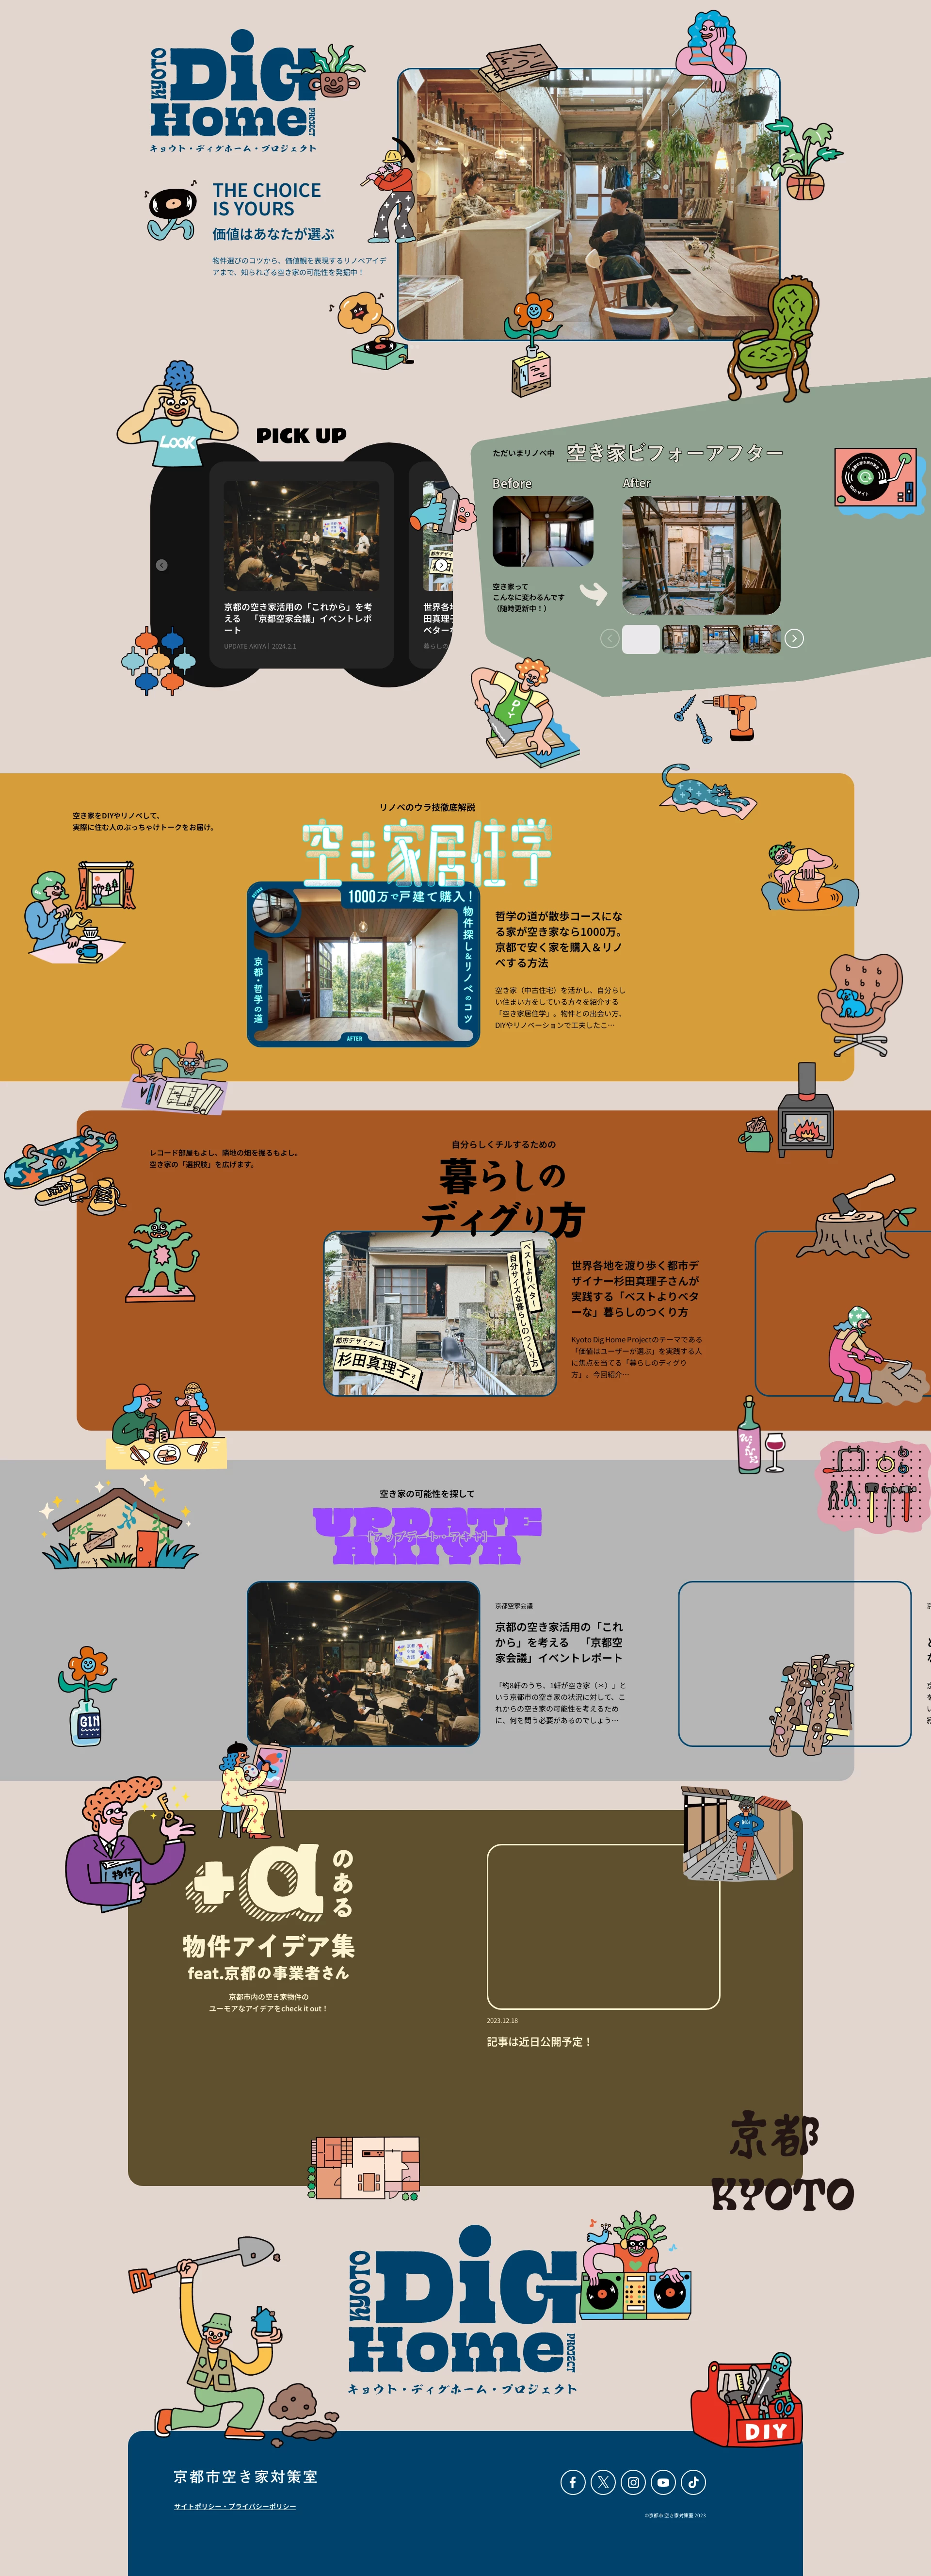 Kyoto Dig Home Project